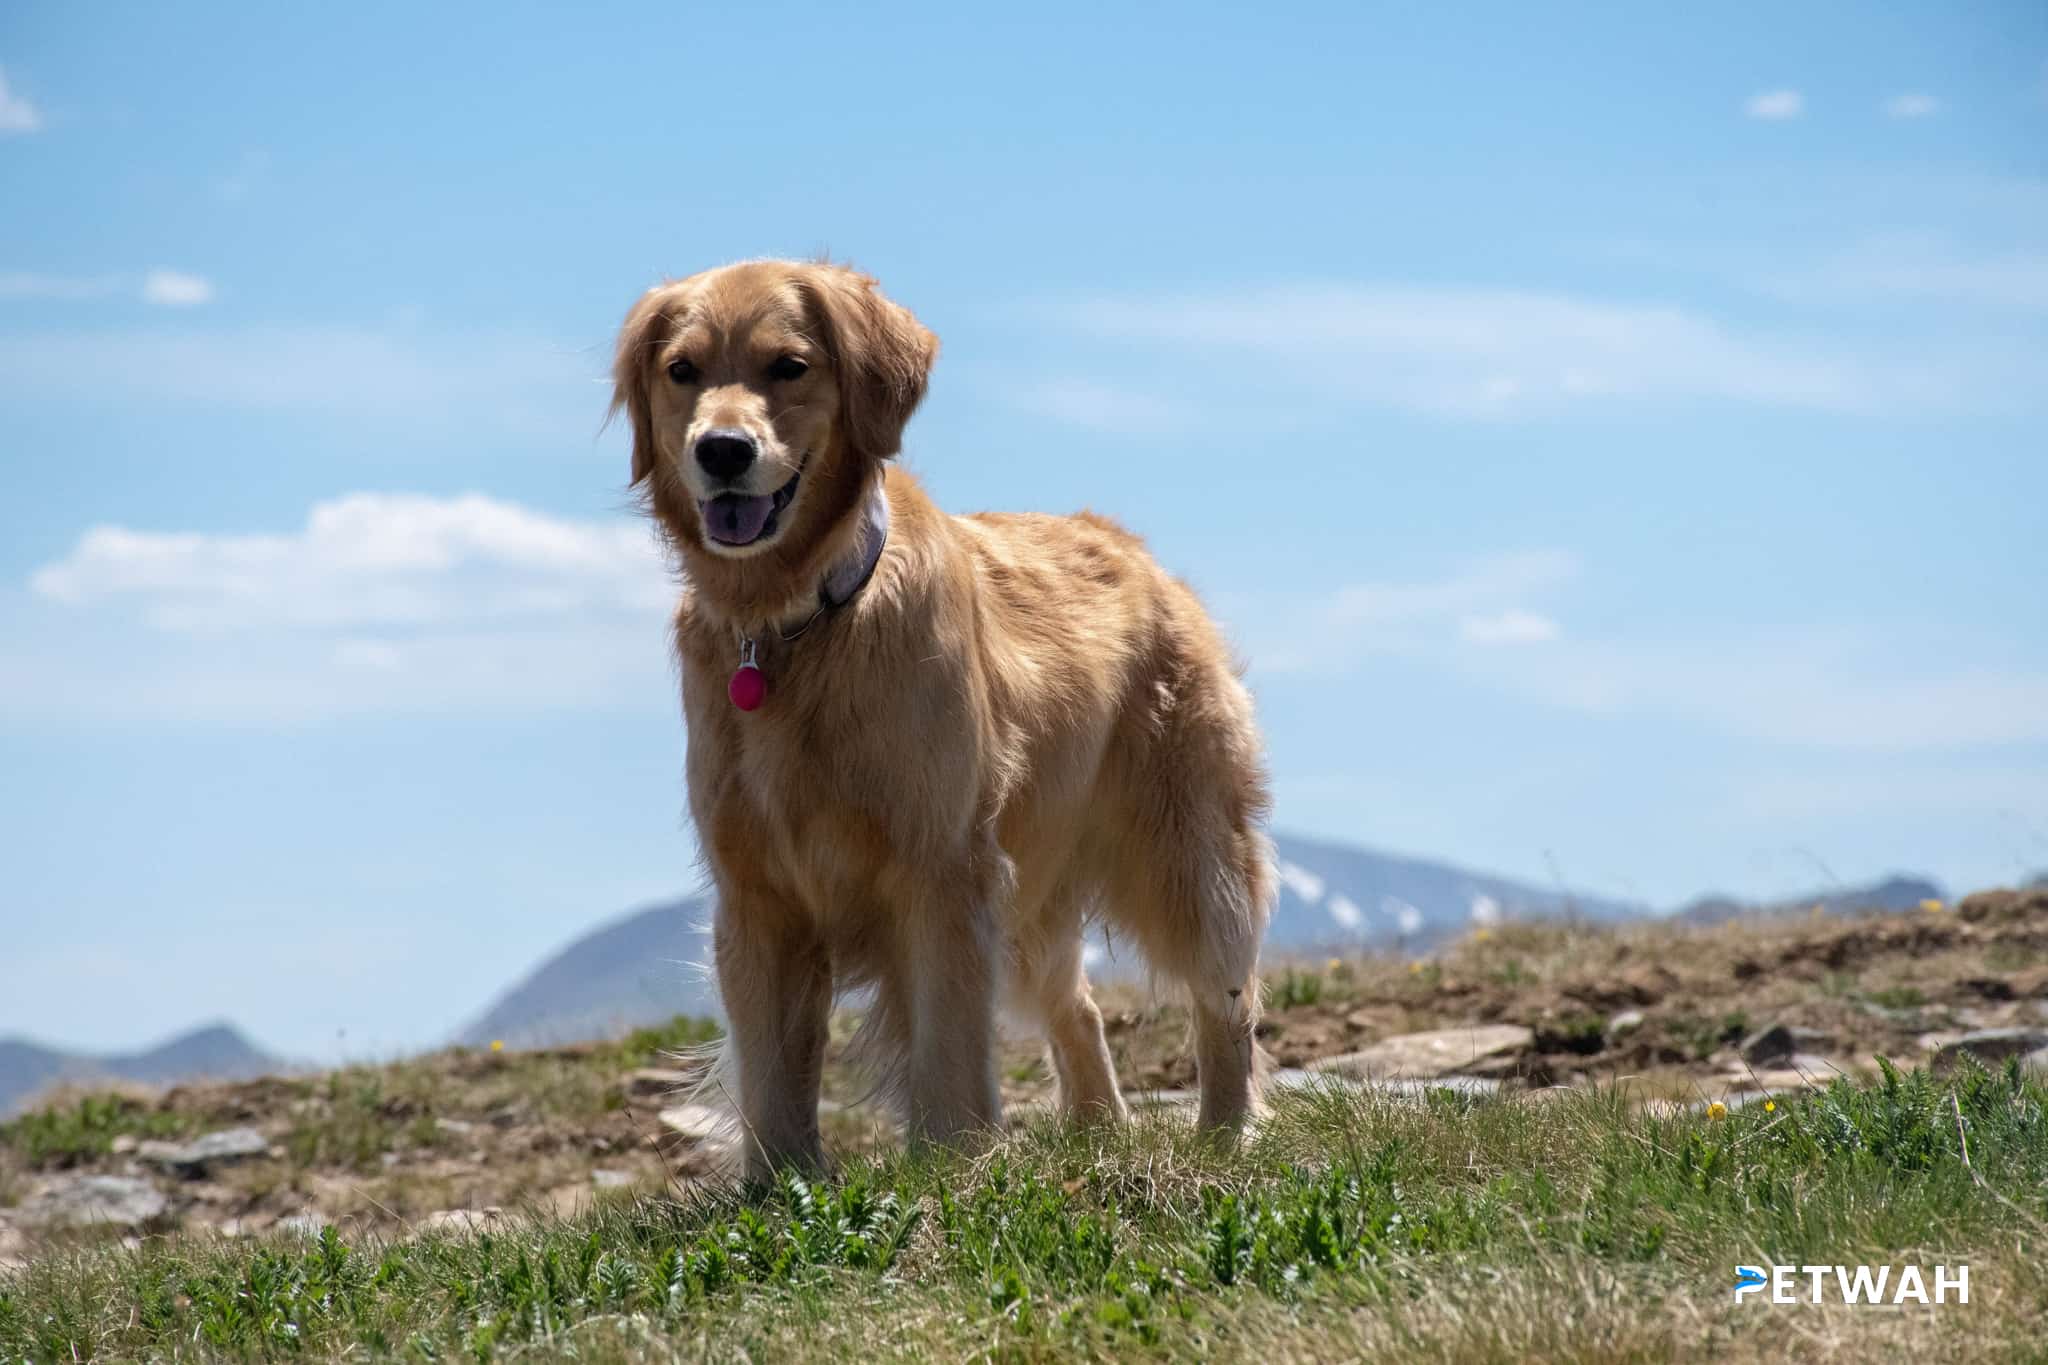 Signs of Inadequate Exercise in a Golden Retriever Puppy